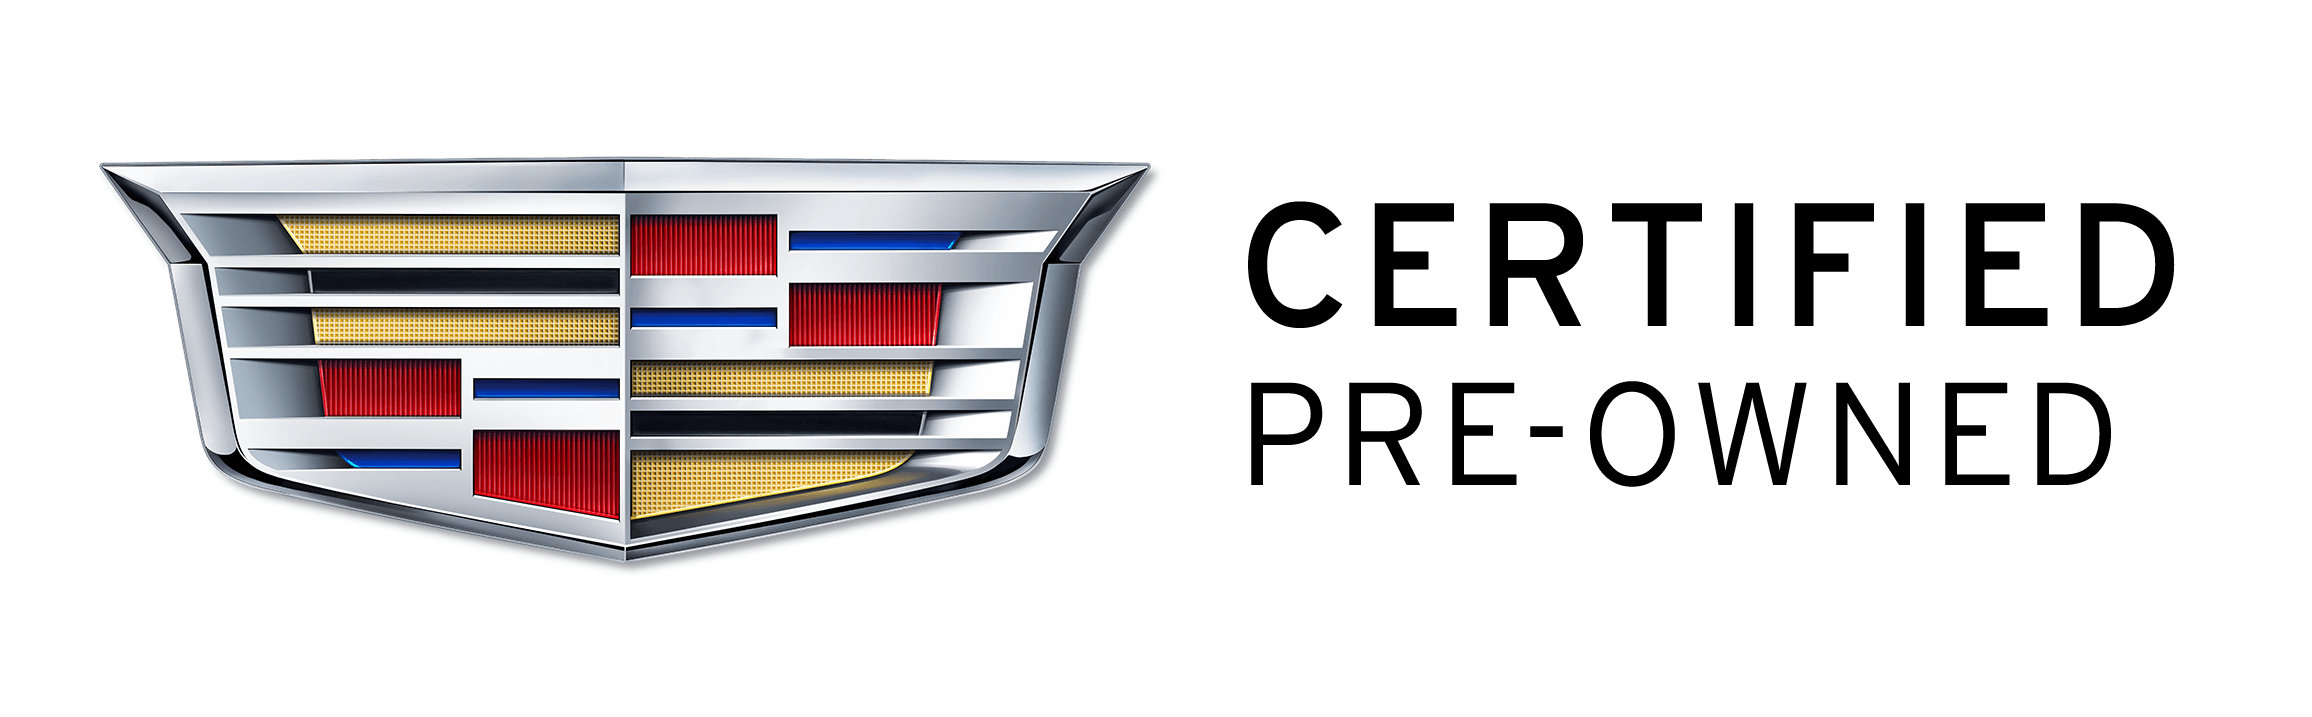 Certified Cadillac Logo - Certified Pre-Owned Cadillacs For Sale in Pawleys Island, SC | Coastal